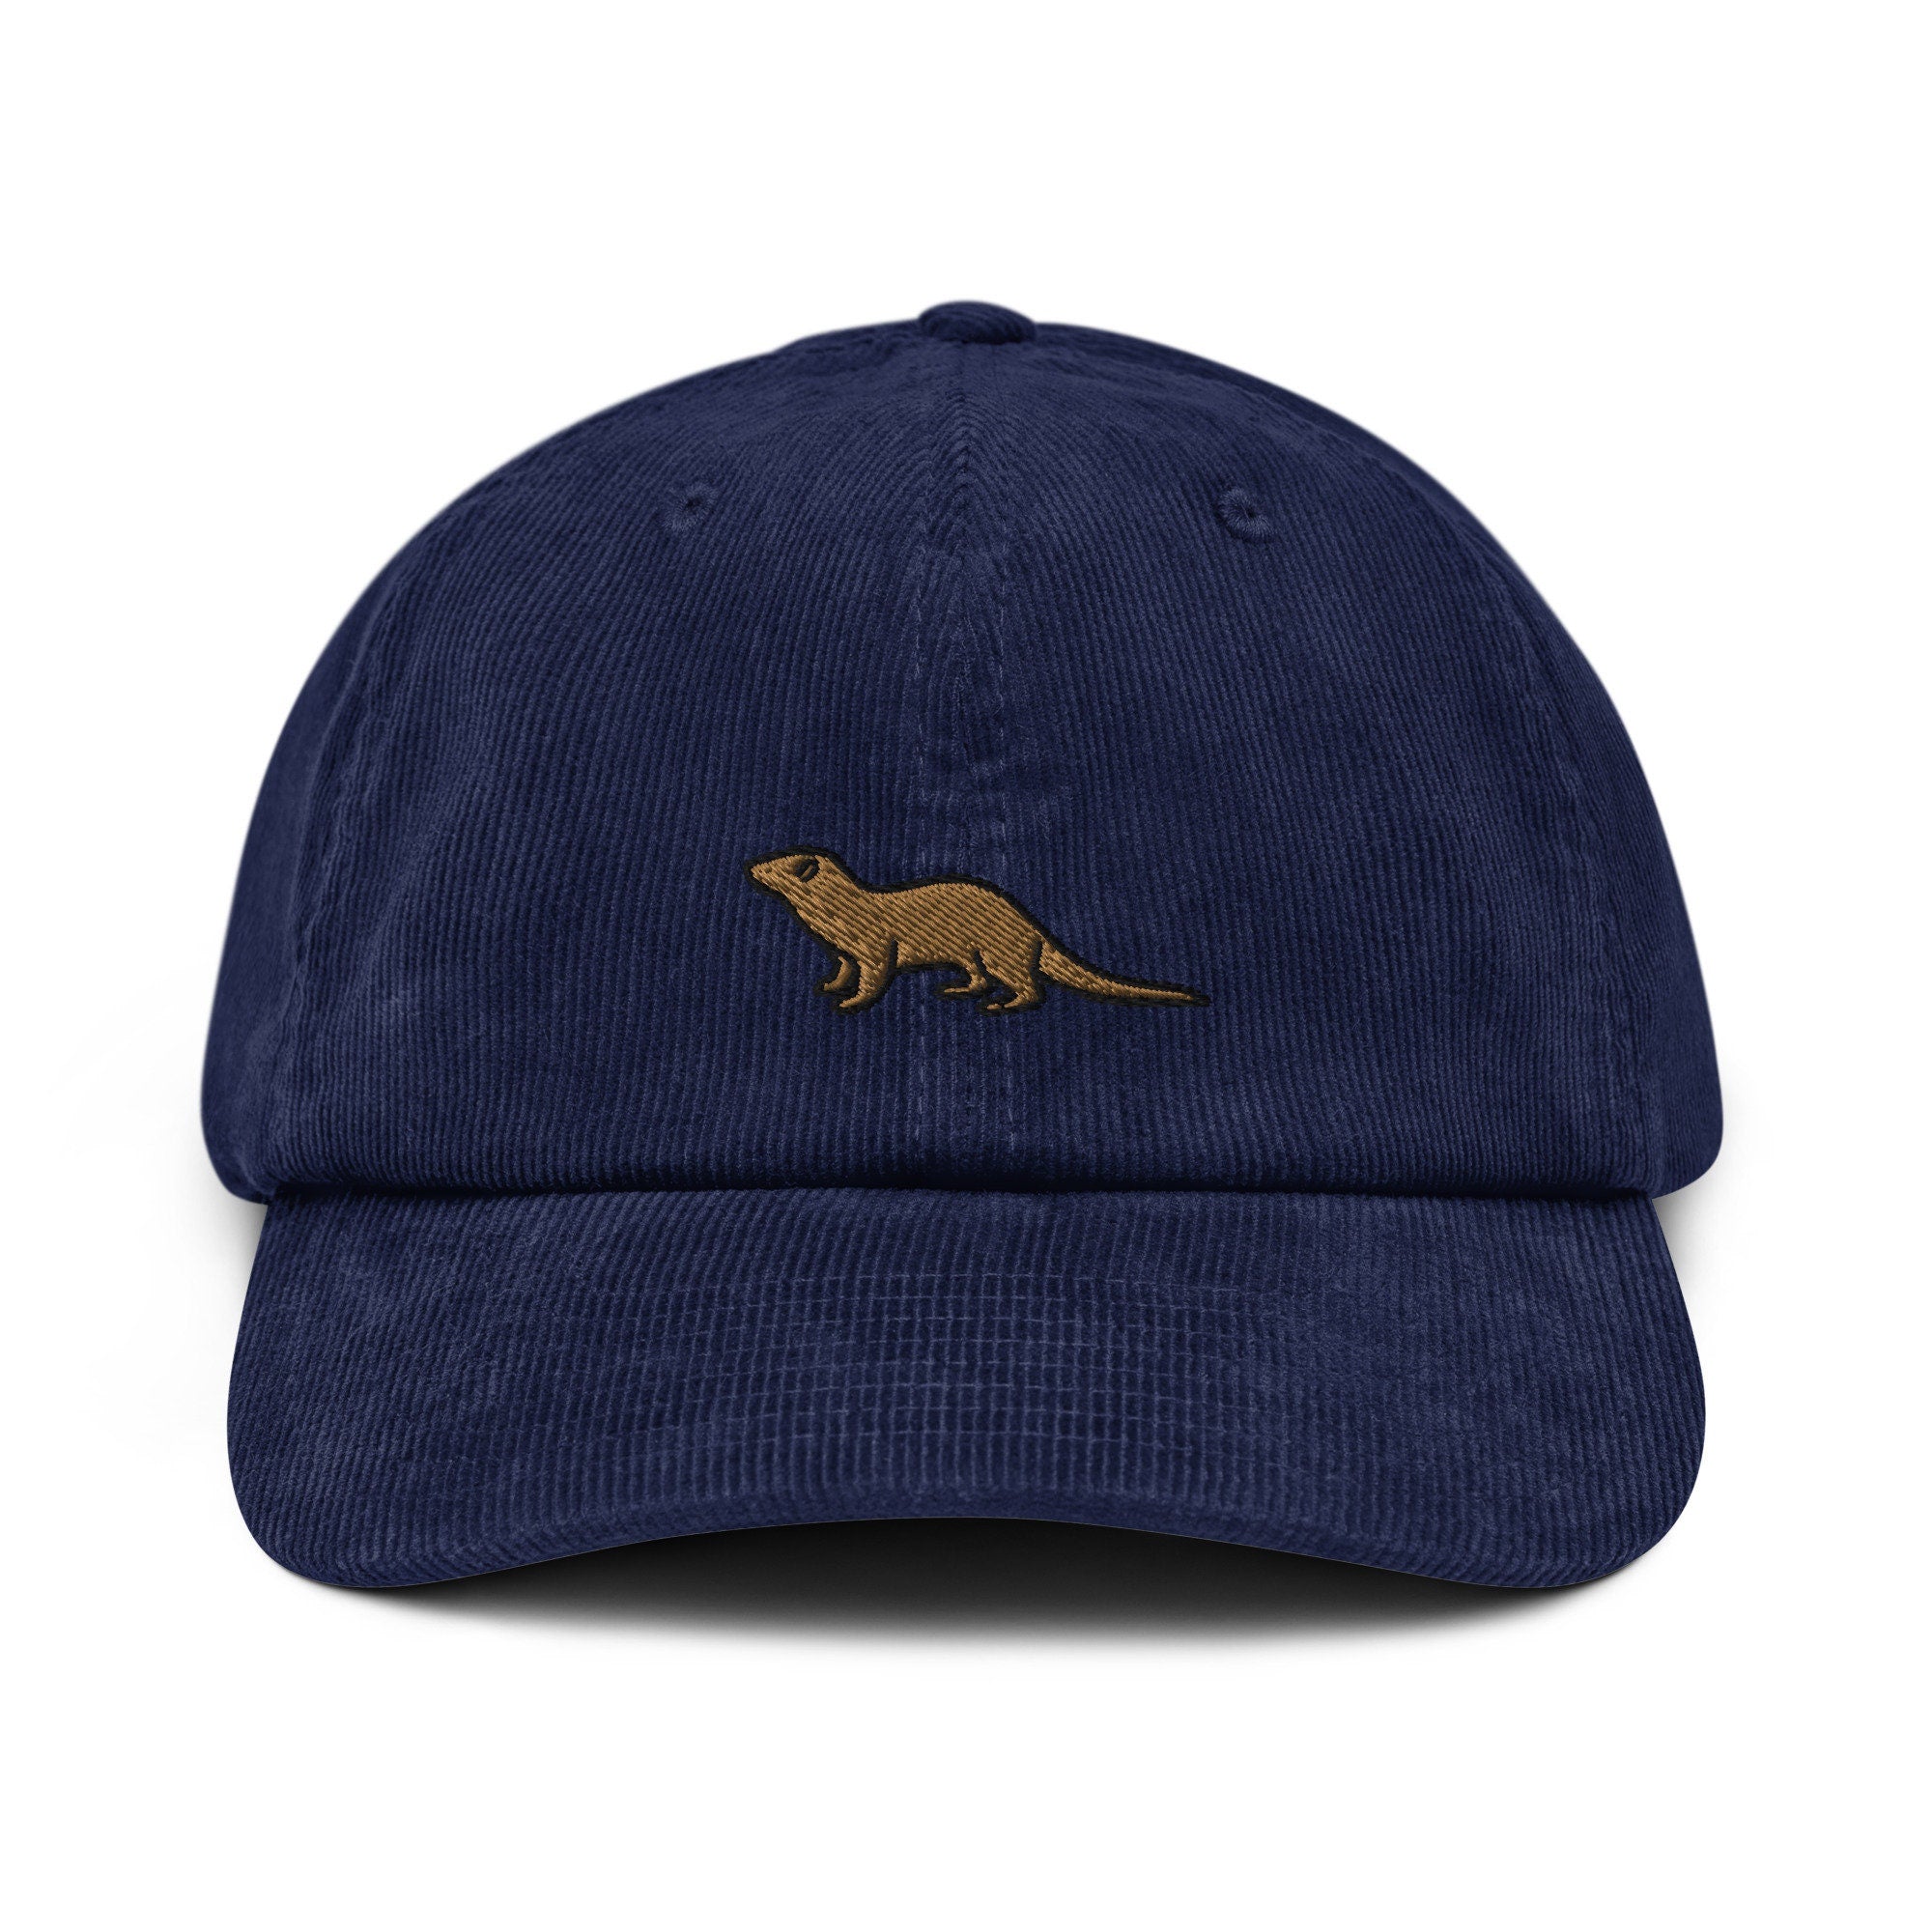 Otter Corduroy Hat, Handmade Embroidered Corduroy Dad Cap - Multiple Colors